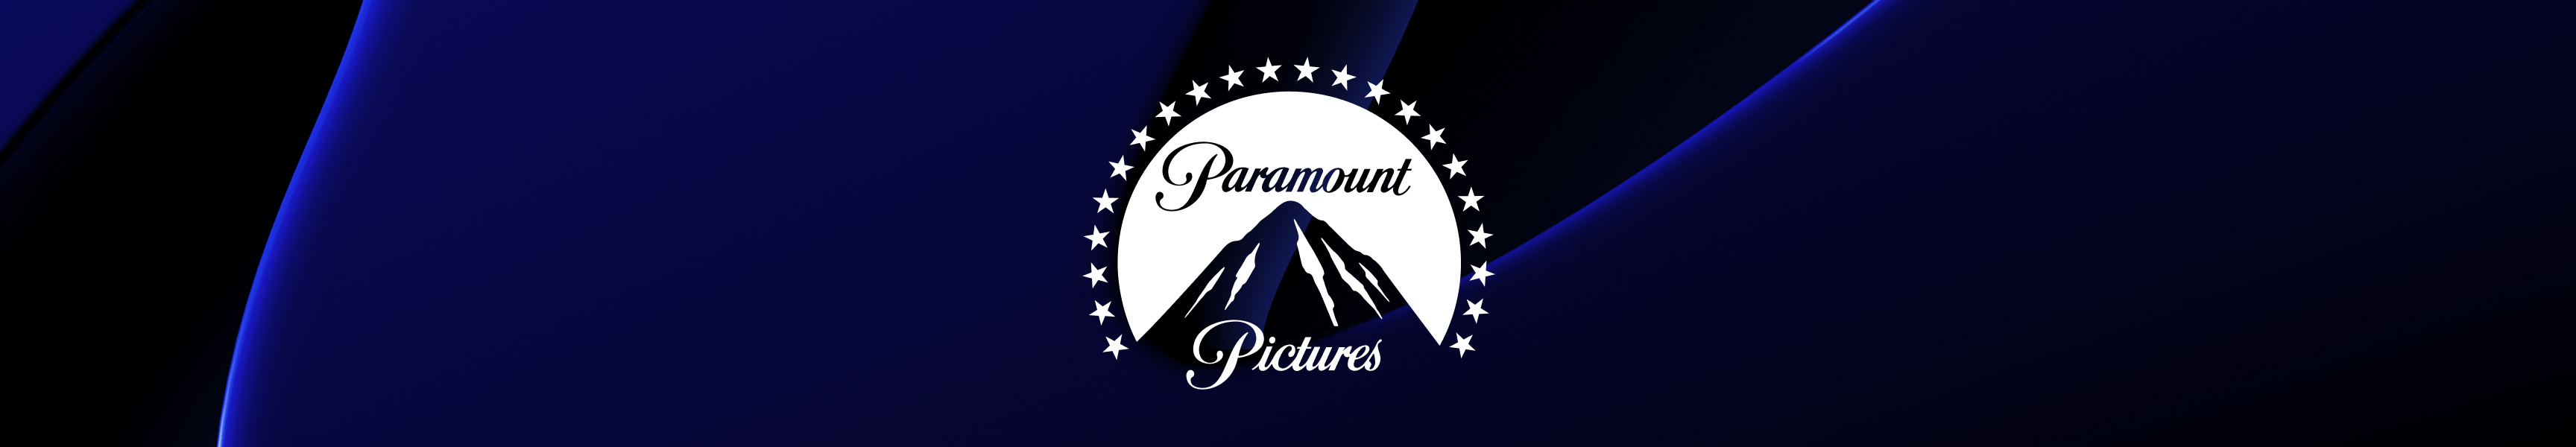 Paramount Pictures Ropa